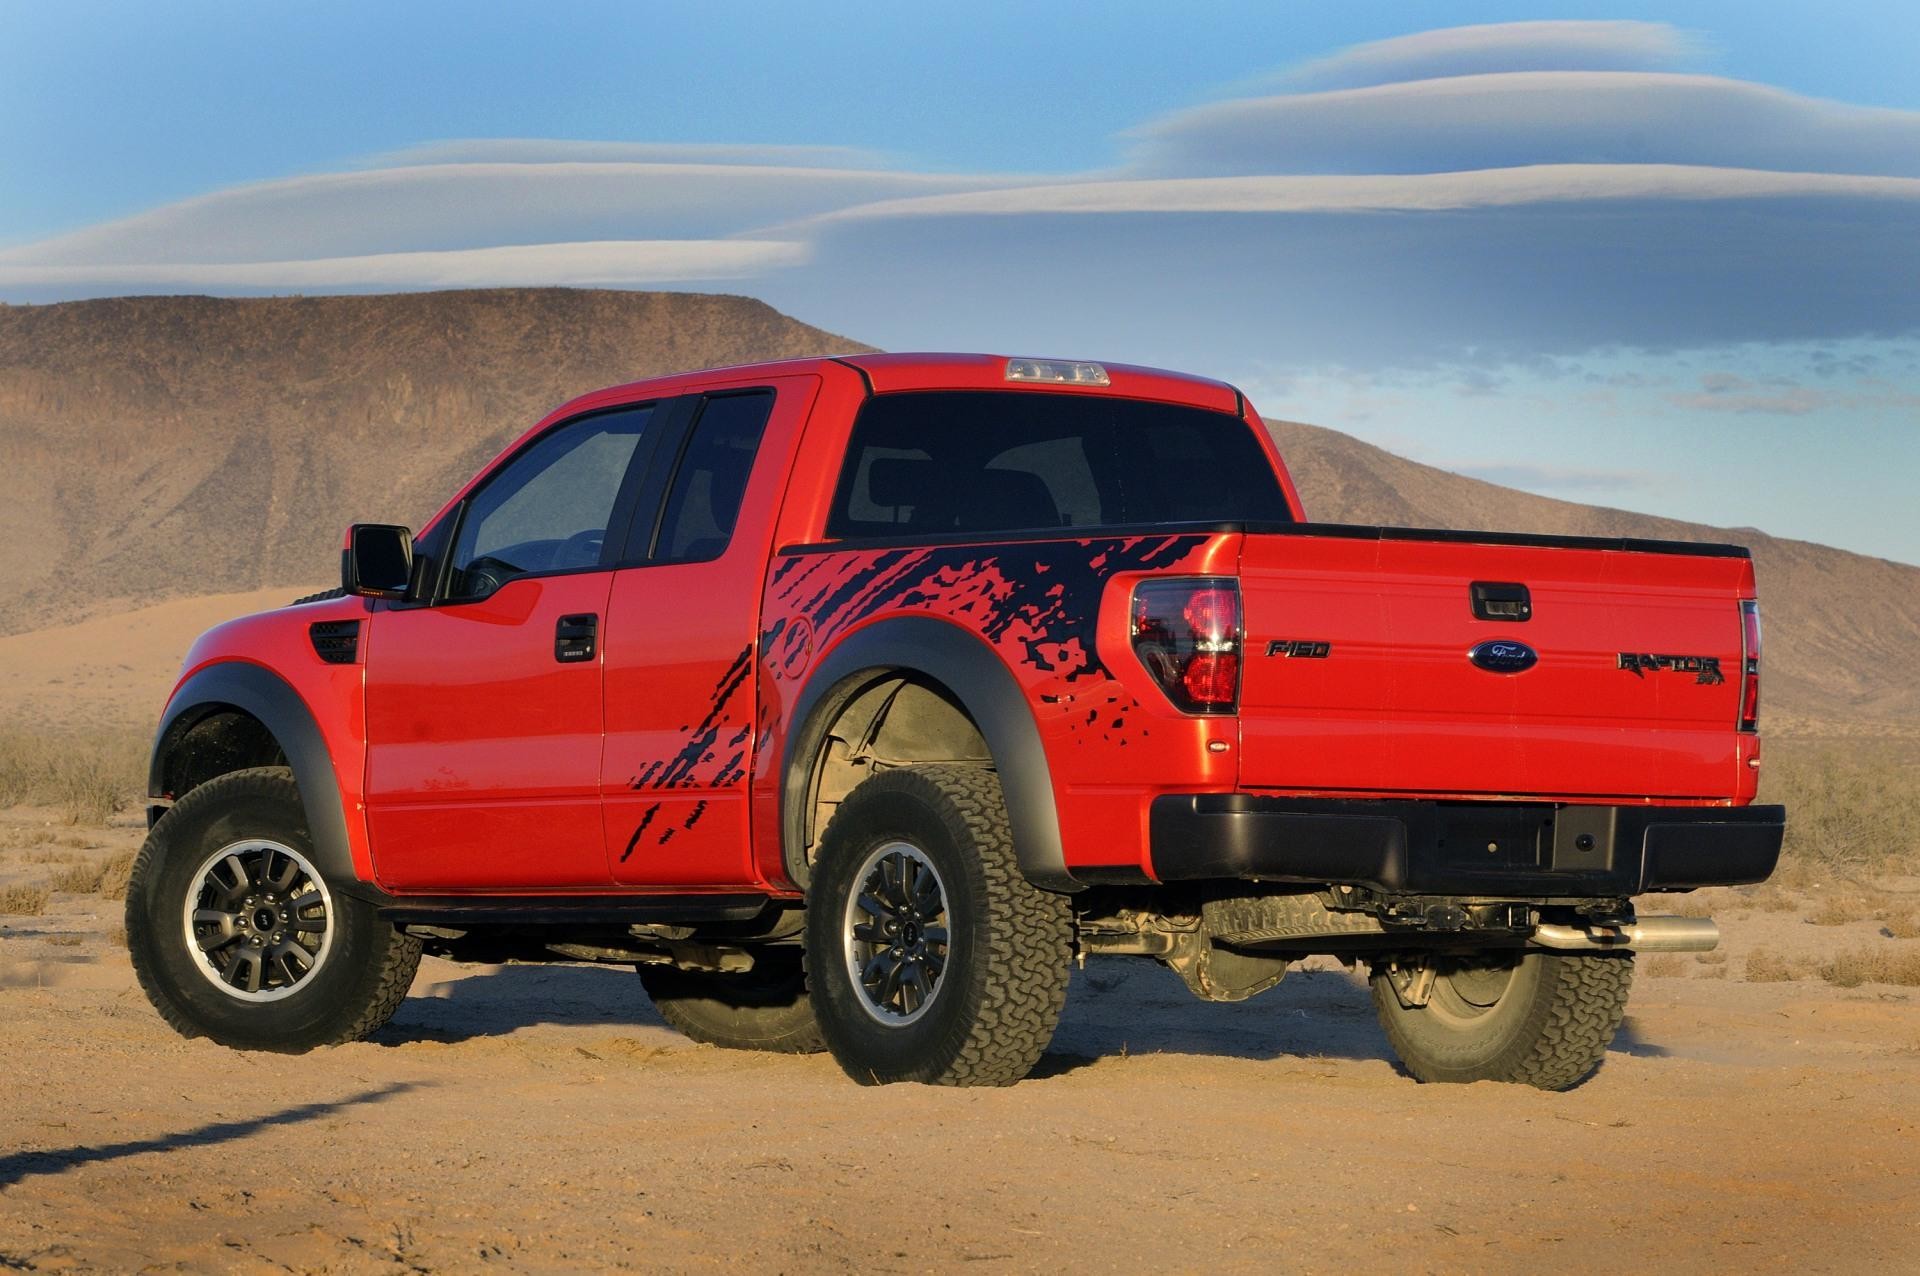 1920x1276 Humphrey__13 Hintergrund probably containing a pickup titled Ford F-150  Raptor Wallpapers.